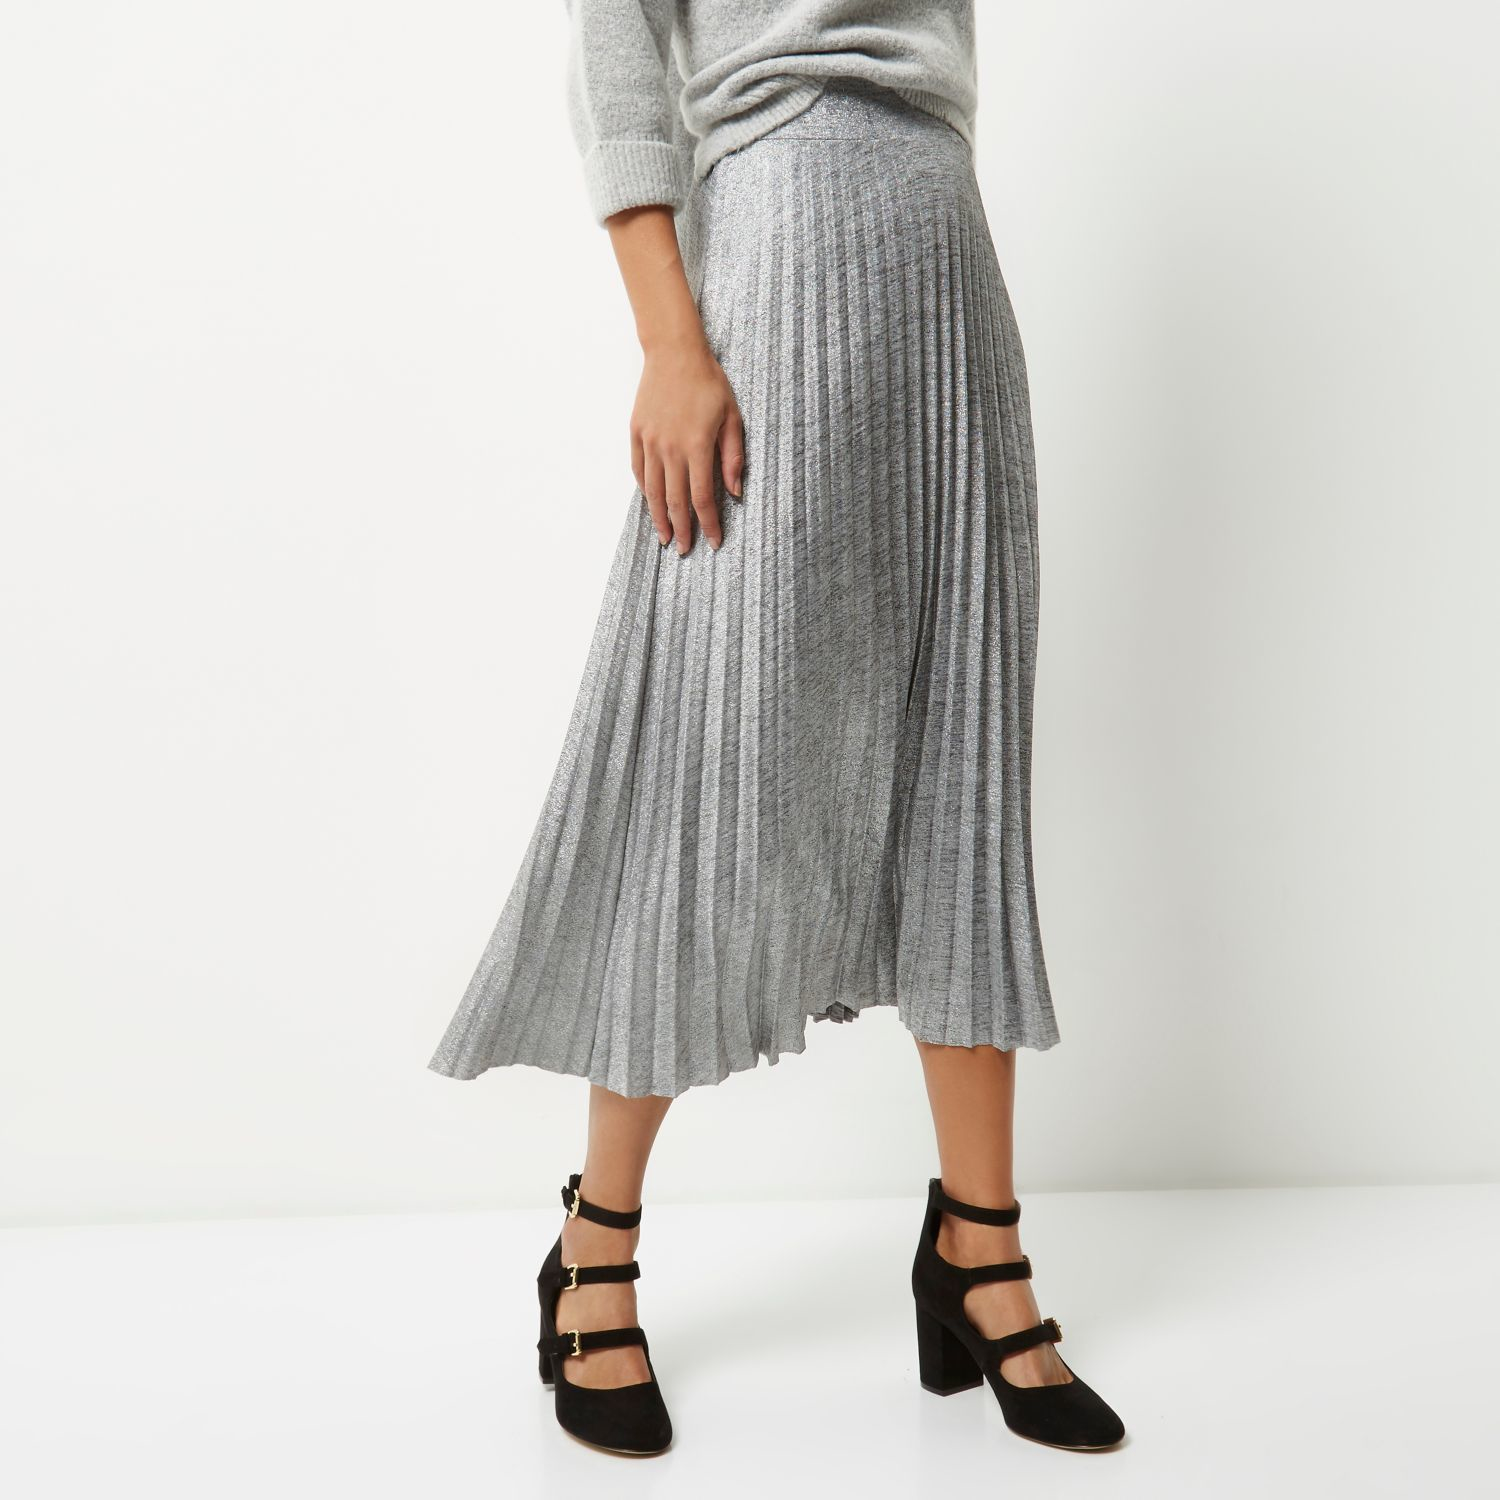 River Island Synthetic Silver Pleated Midi Skirt in Metallic - Lyst